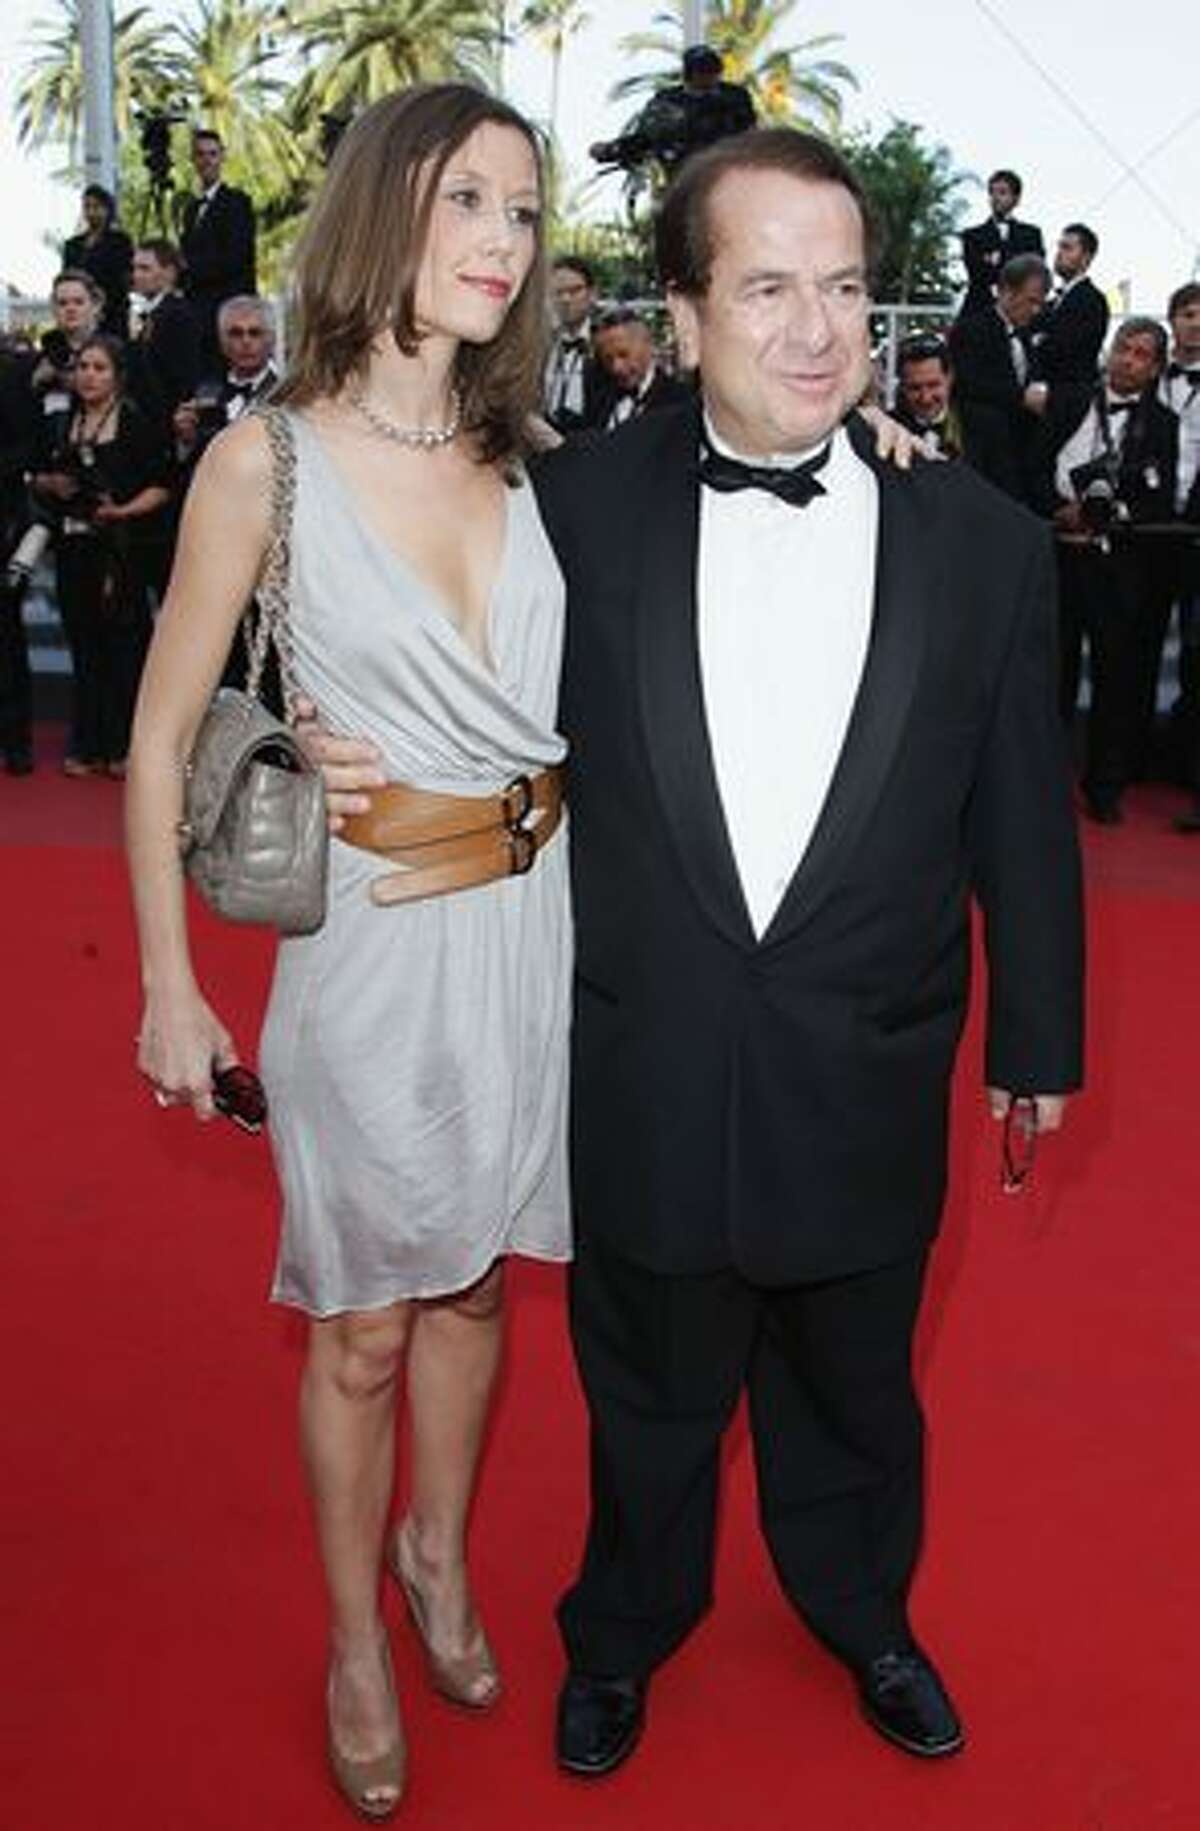 CANNES, FRANCE - MAY 22: Paul-Loup Sulitzer and guest attend the "The Exodus - Burnt By The Sun" Premiere at the Palais des Festivals during the 63rd Annual Cannes Film Festival on May 22, 2010 in Cannes, France.